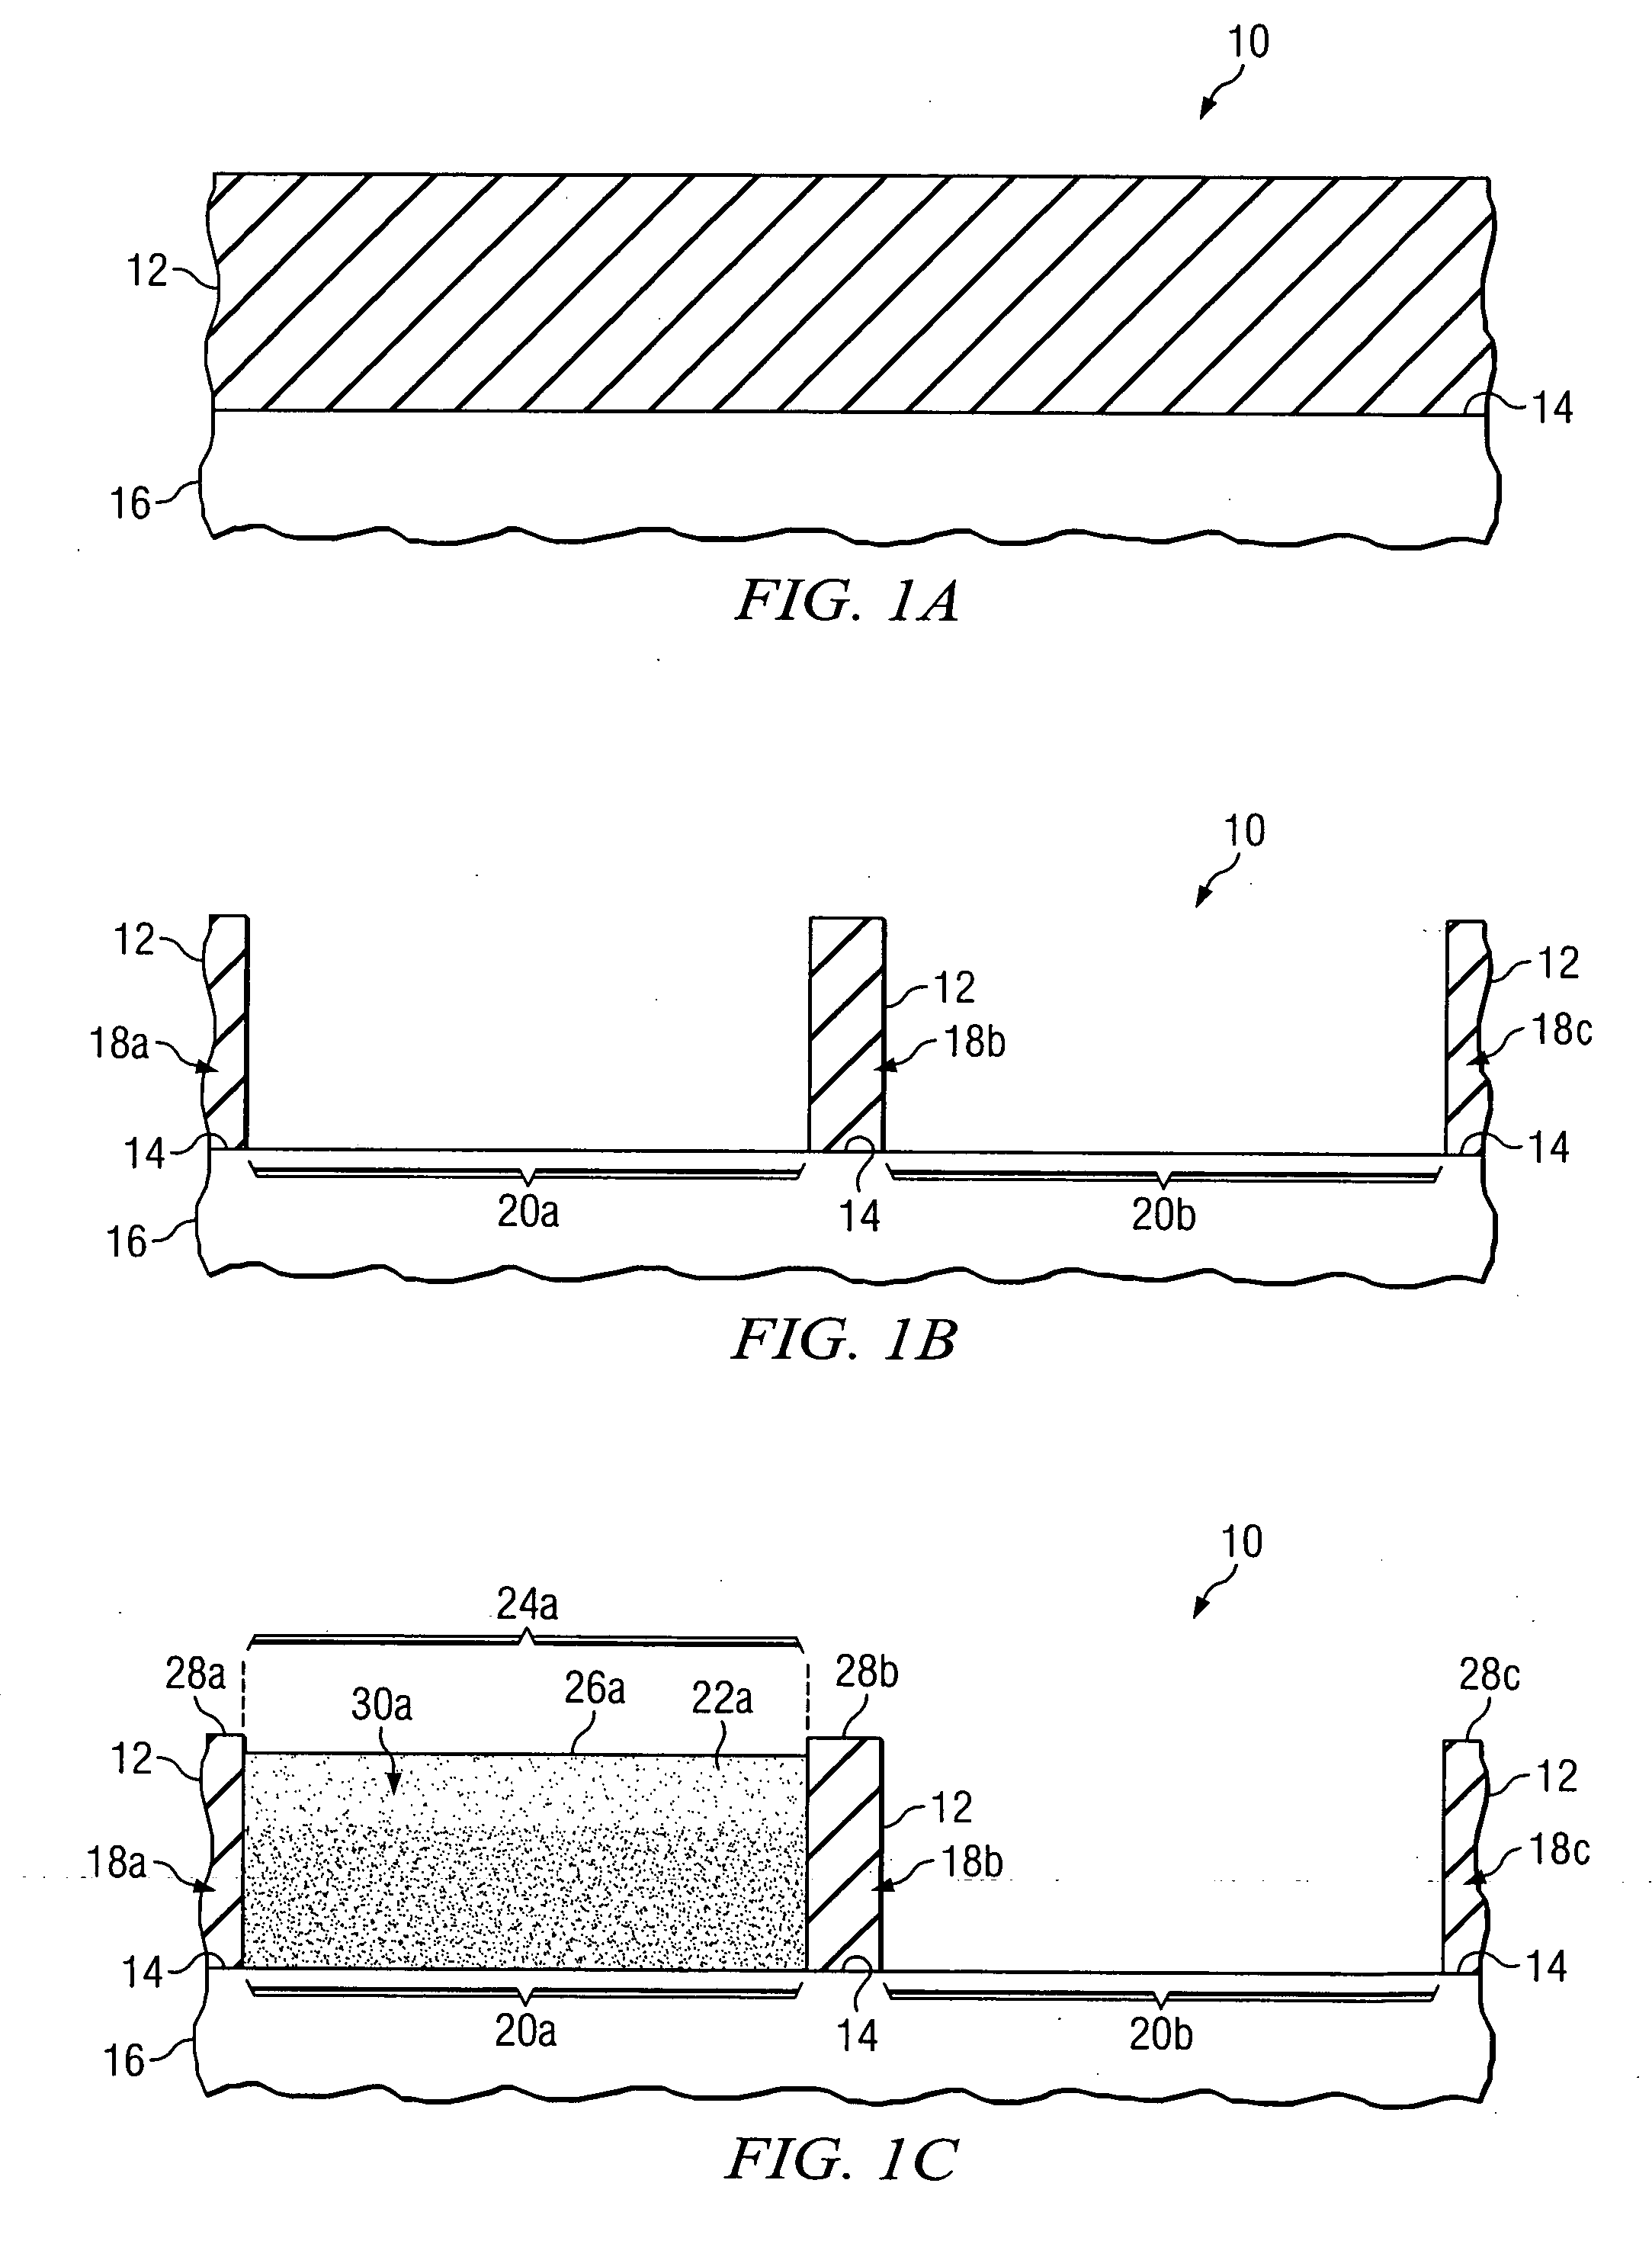 Forming a semiconductor structure in manufacturing a semiconductor device using one or more epitaxial growth processes